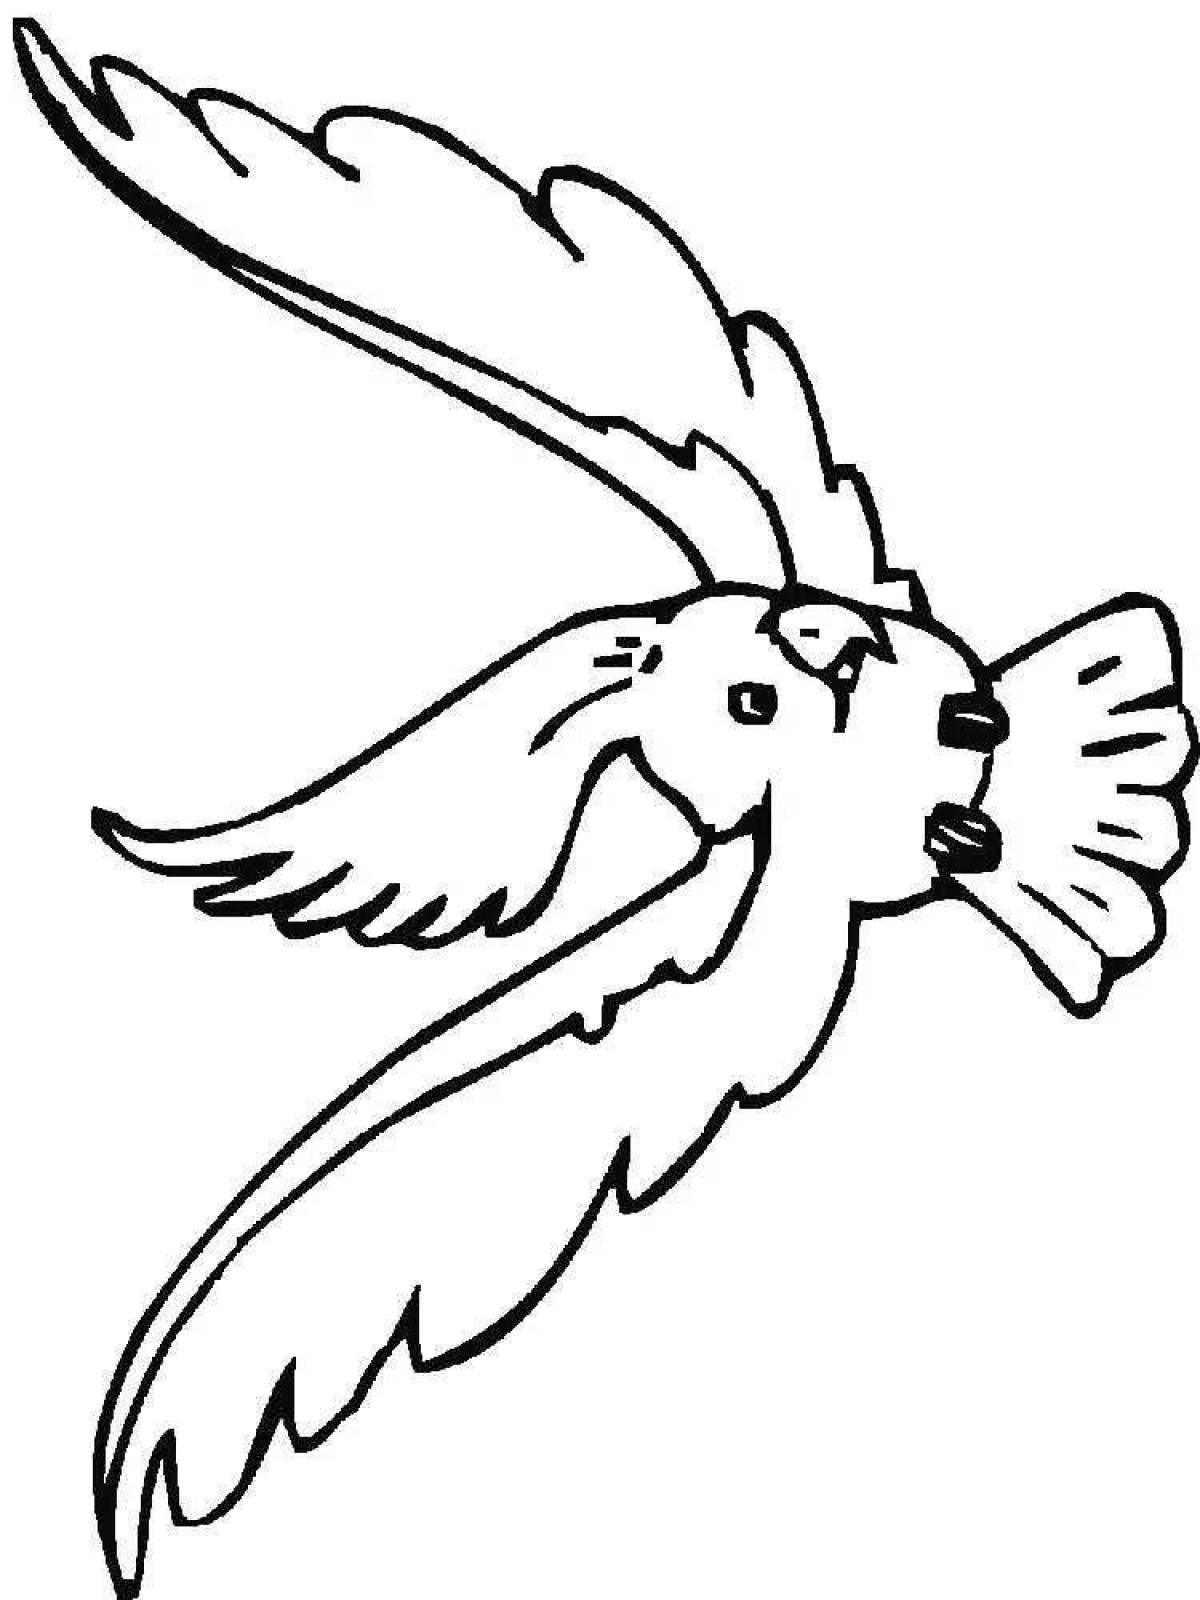 Awesome cockatoo coloring page